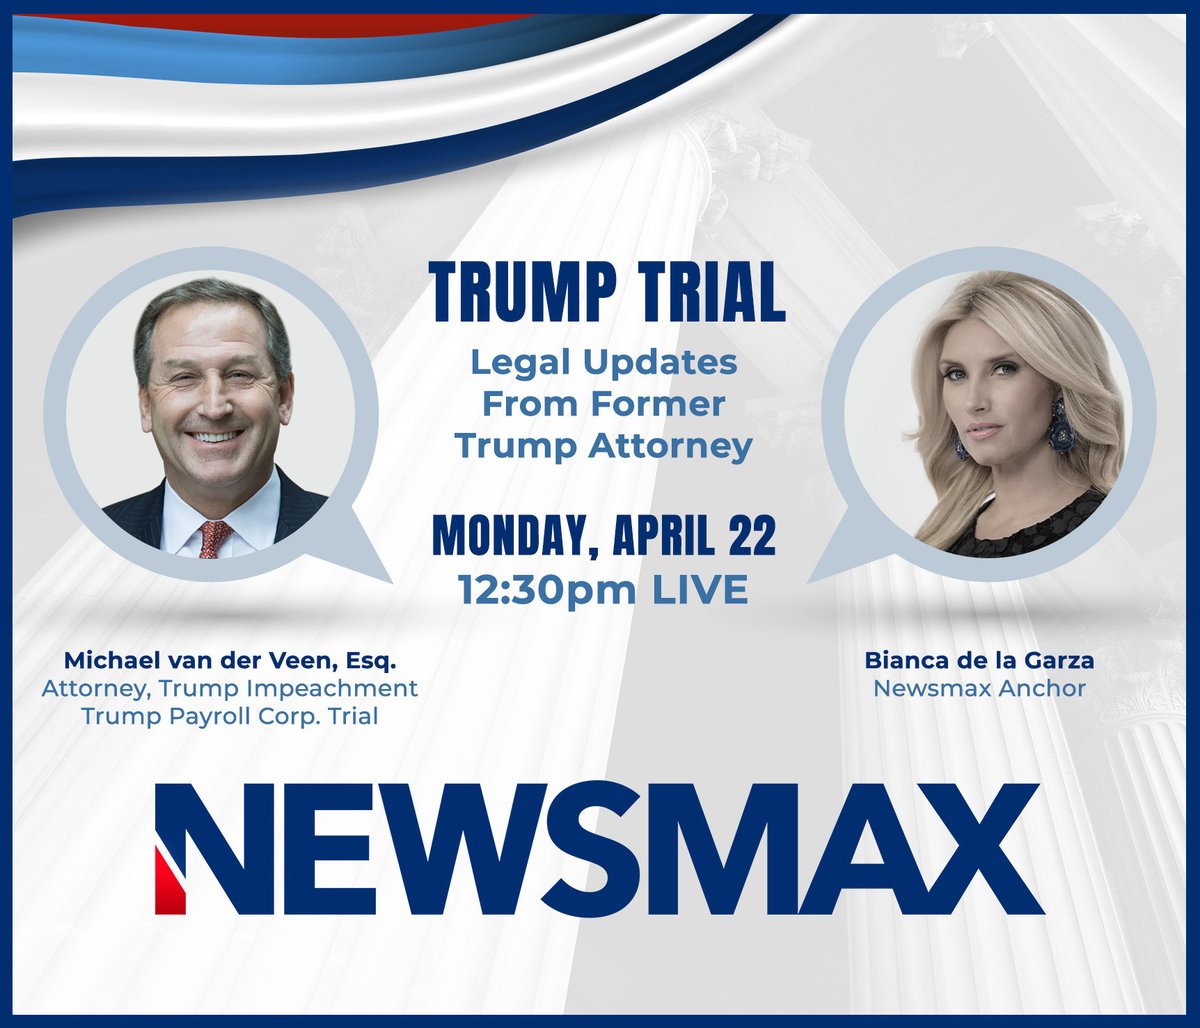 Live today at 12:30pm, former Trump attorney Michael van der Veen, sits down with @BiancaDLGarza #Newsline to analyze the hush money trial. @Newsmax #hushmoneytrial